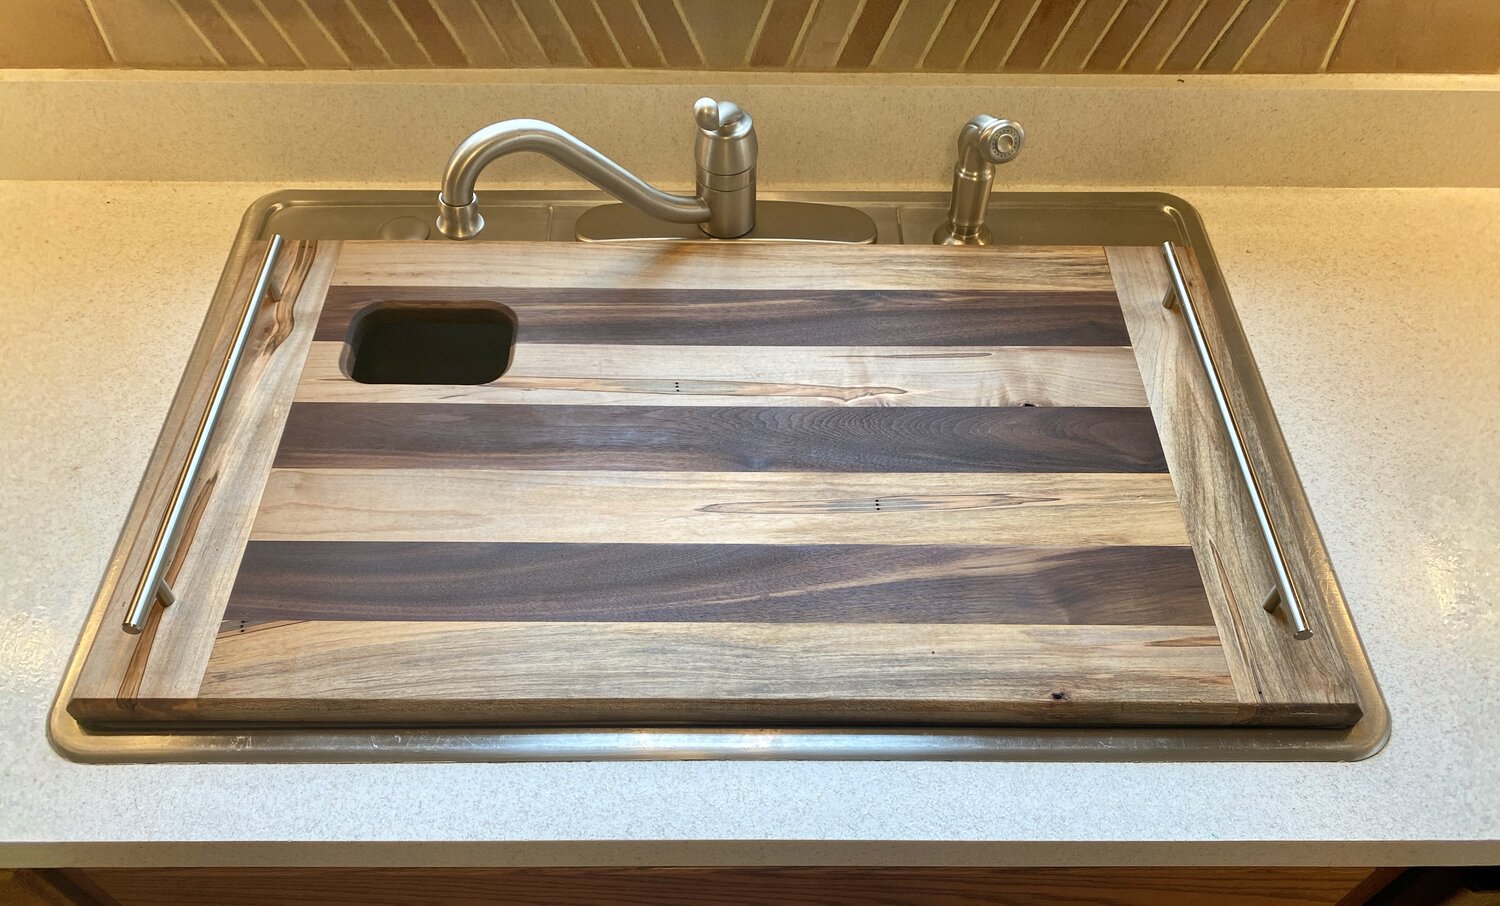 Custom Sink Cover Cutting Board and Over the Sink Surface